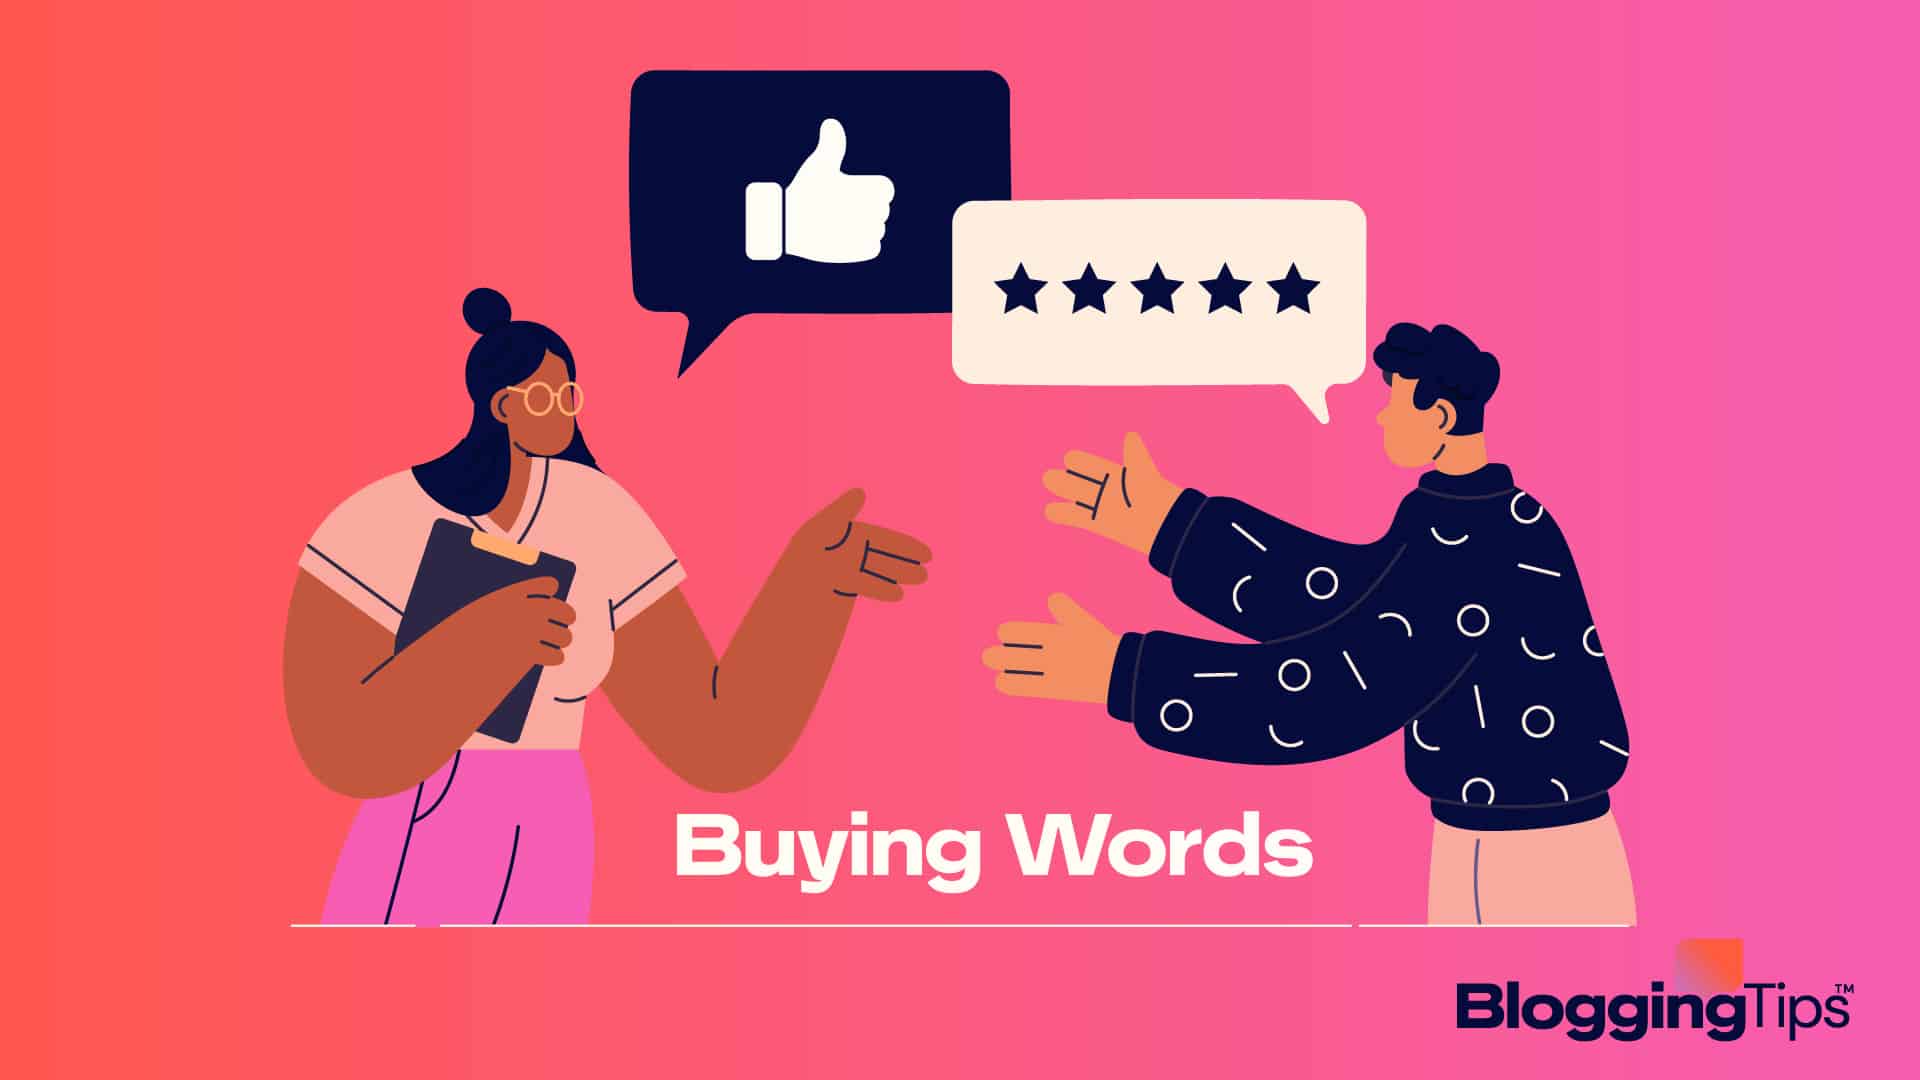 vector graphic showing an illustration of people buying words